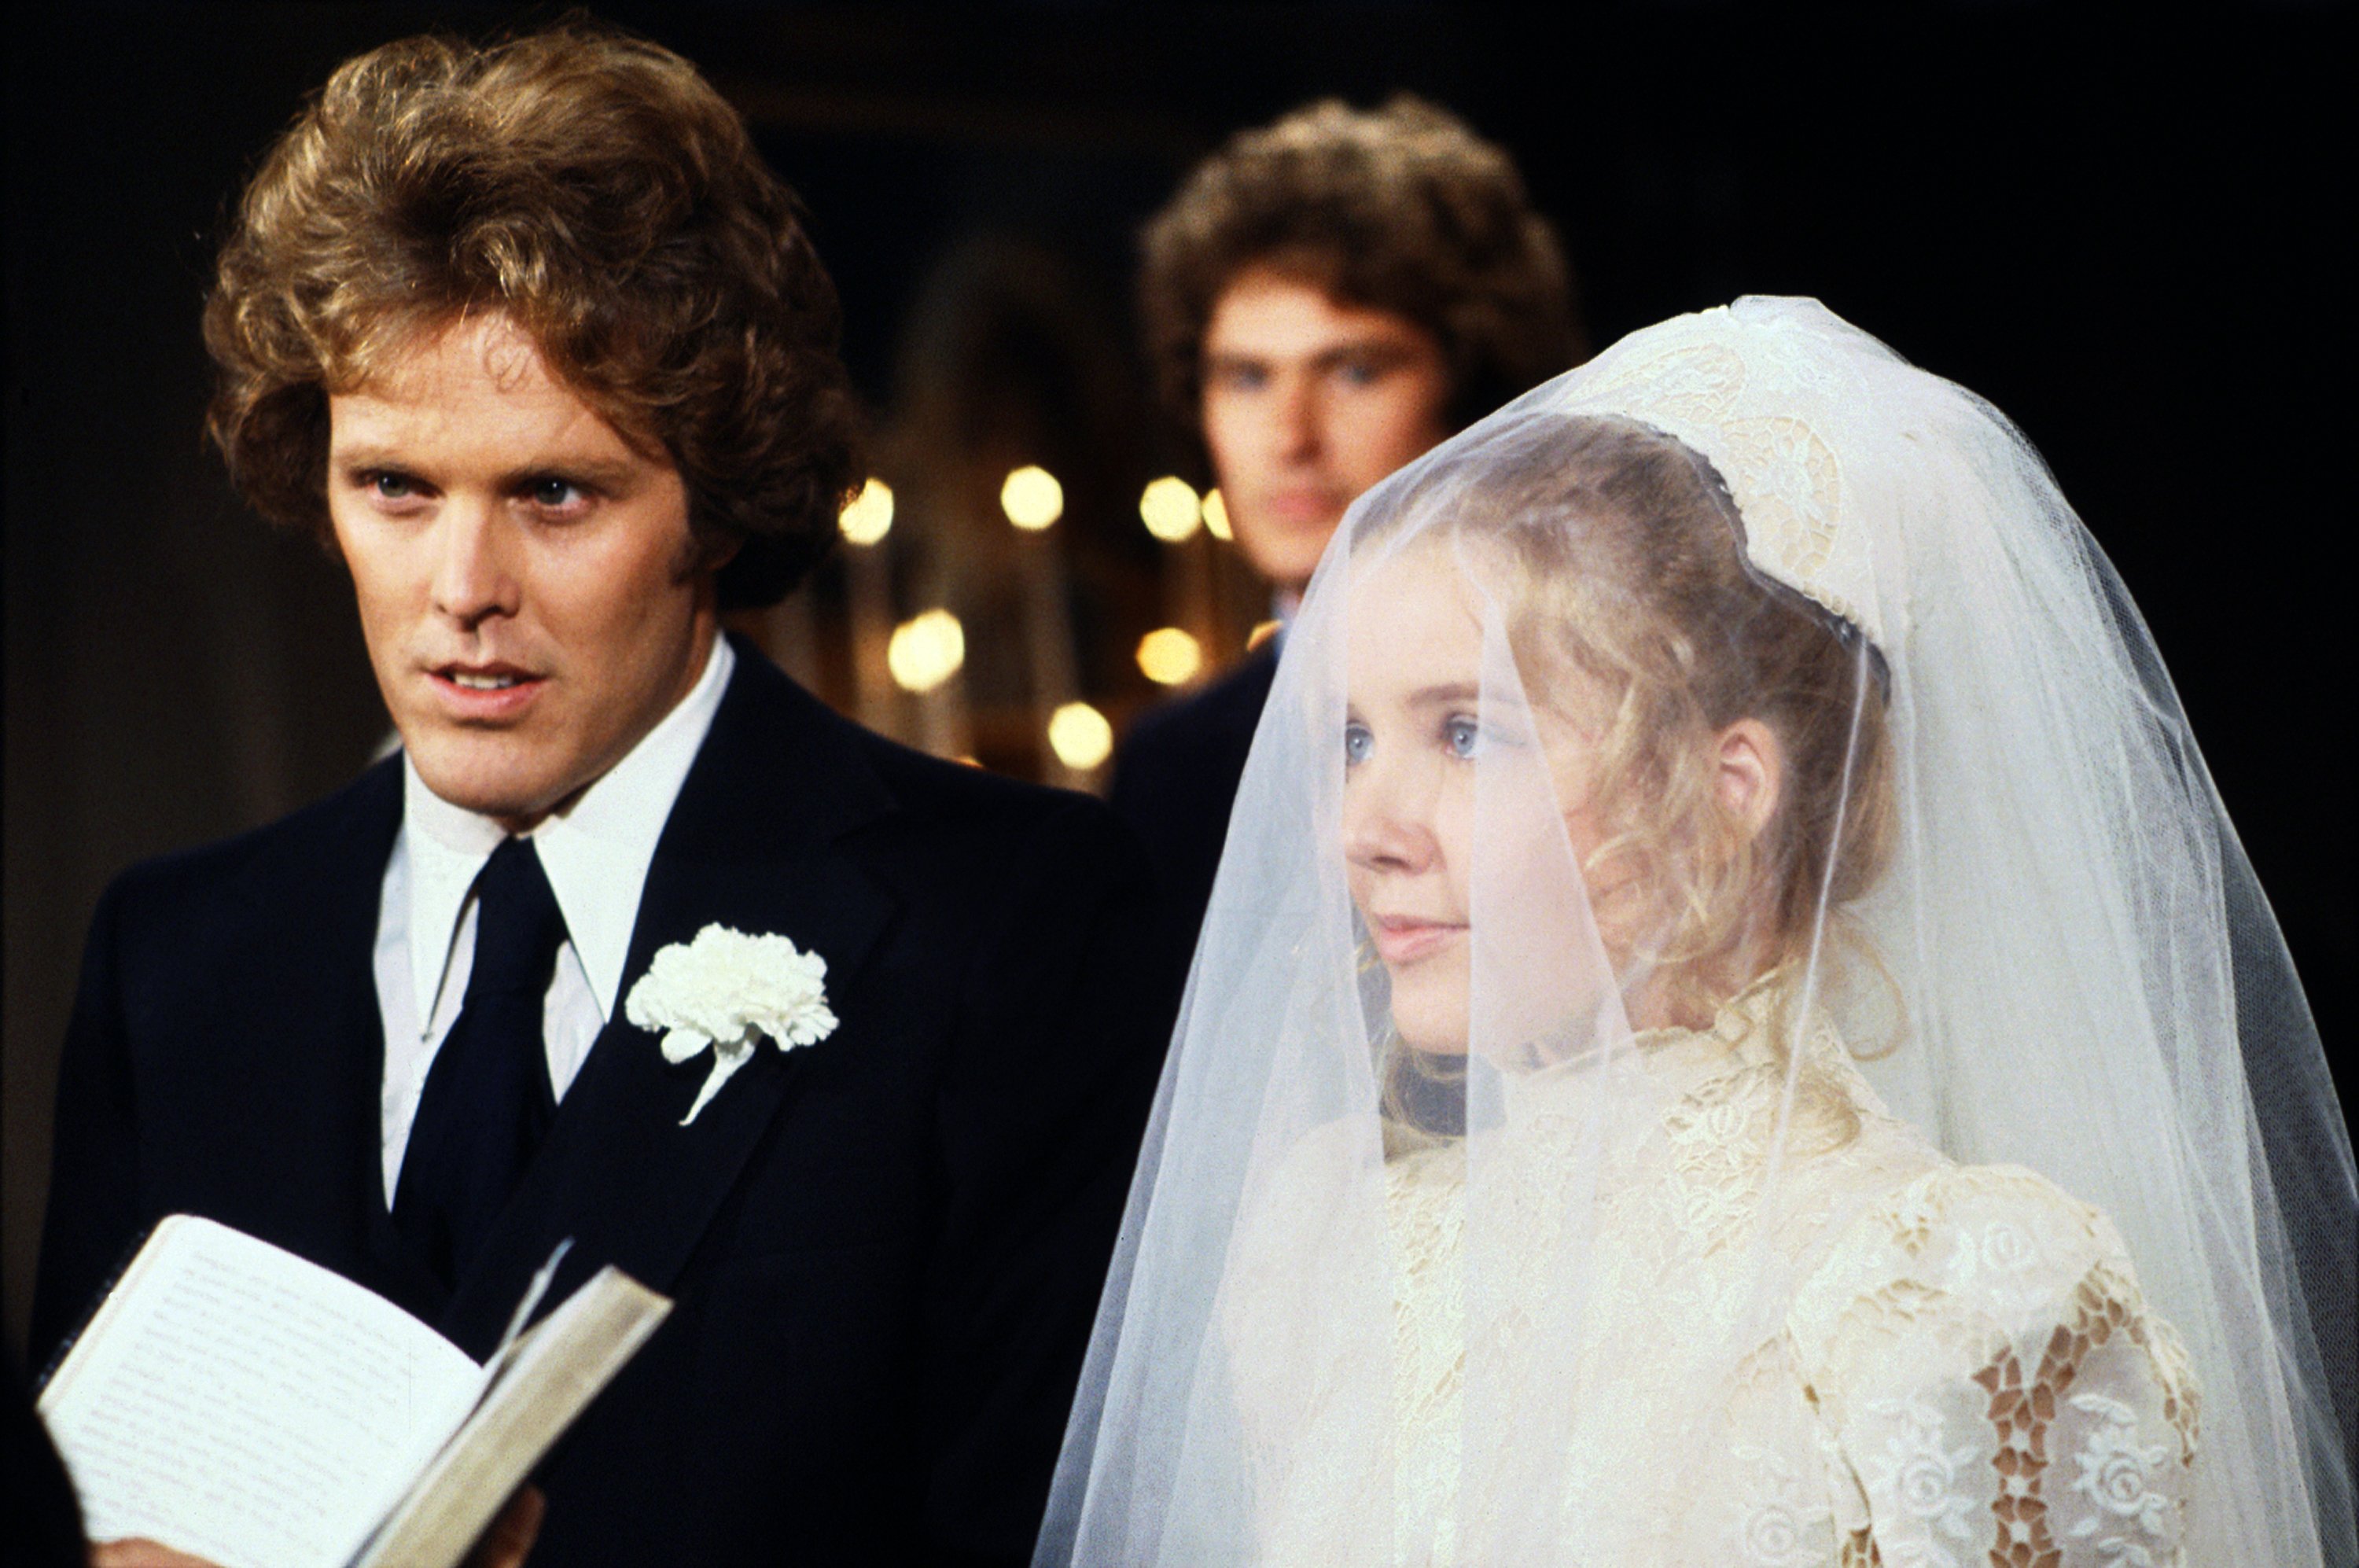 Wings Hauser acting in the show "The Young and the Restless" in 1979. | Source: Getty Images